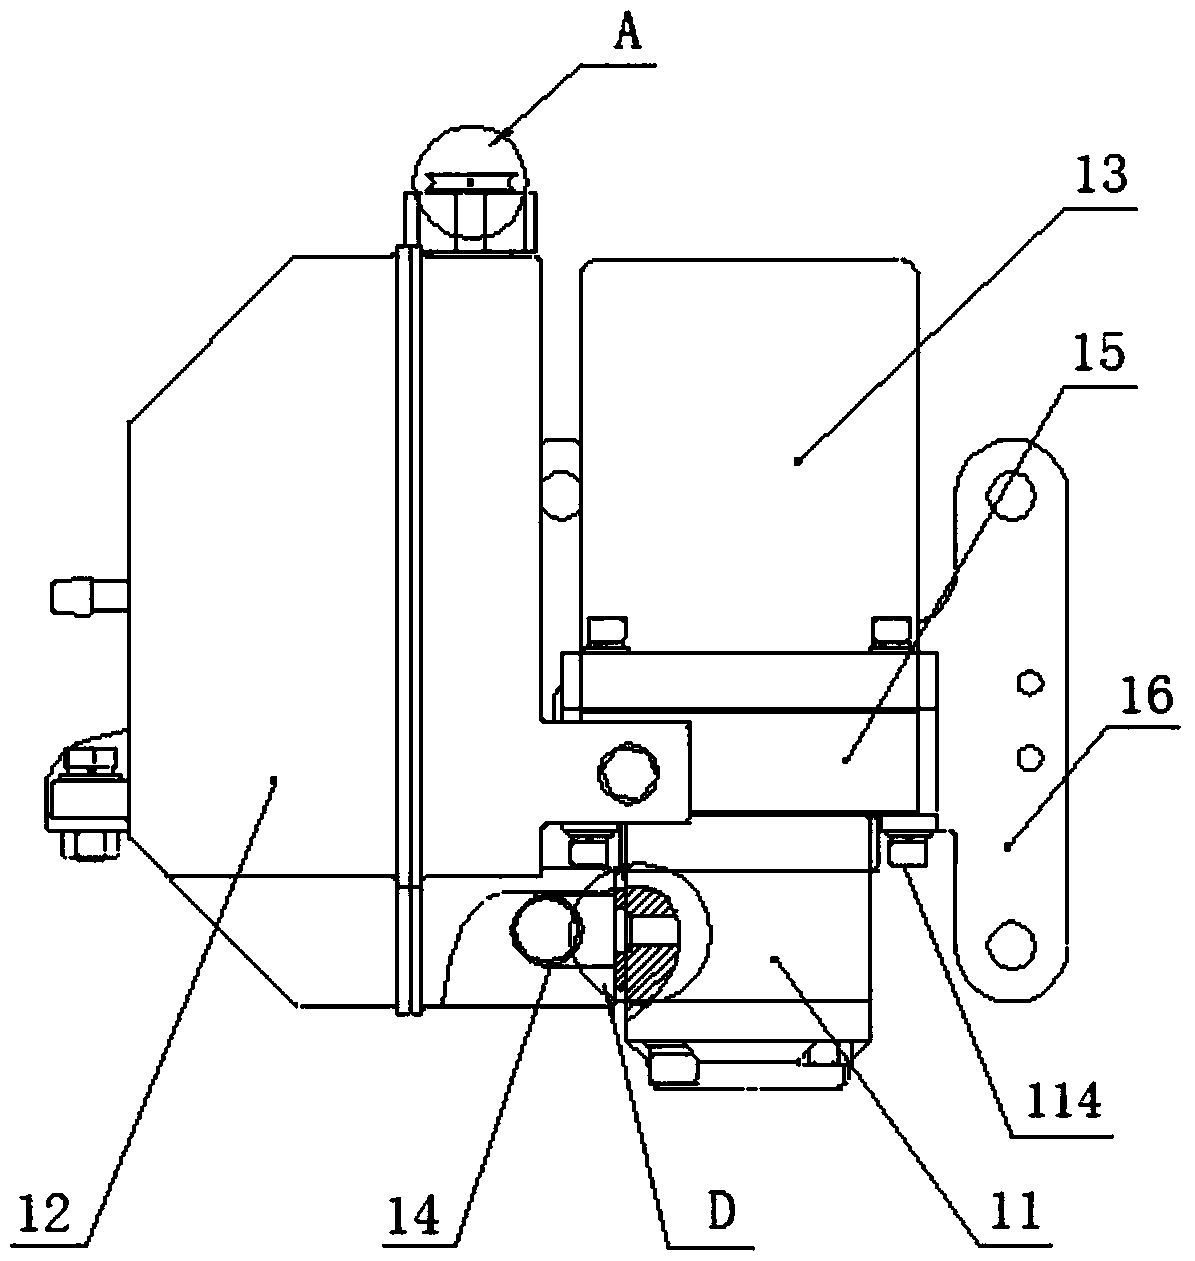 Hydraulic control mechanism for automatic clutch in hybrid electric vehicle